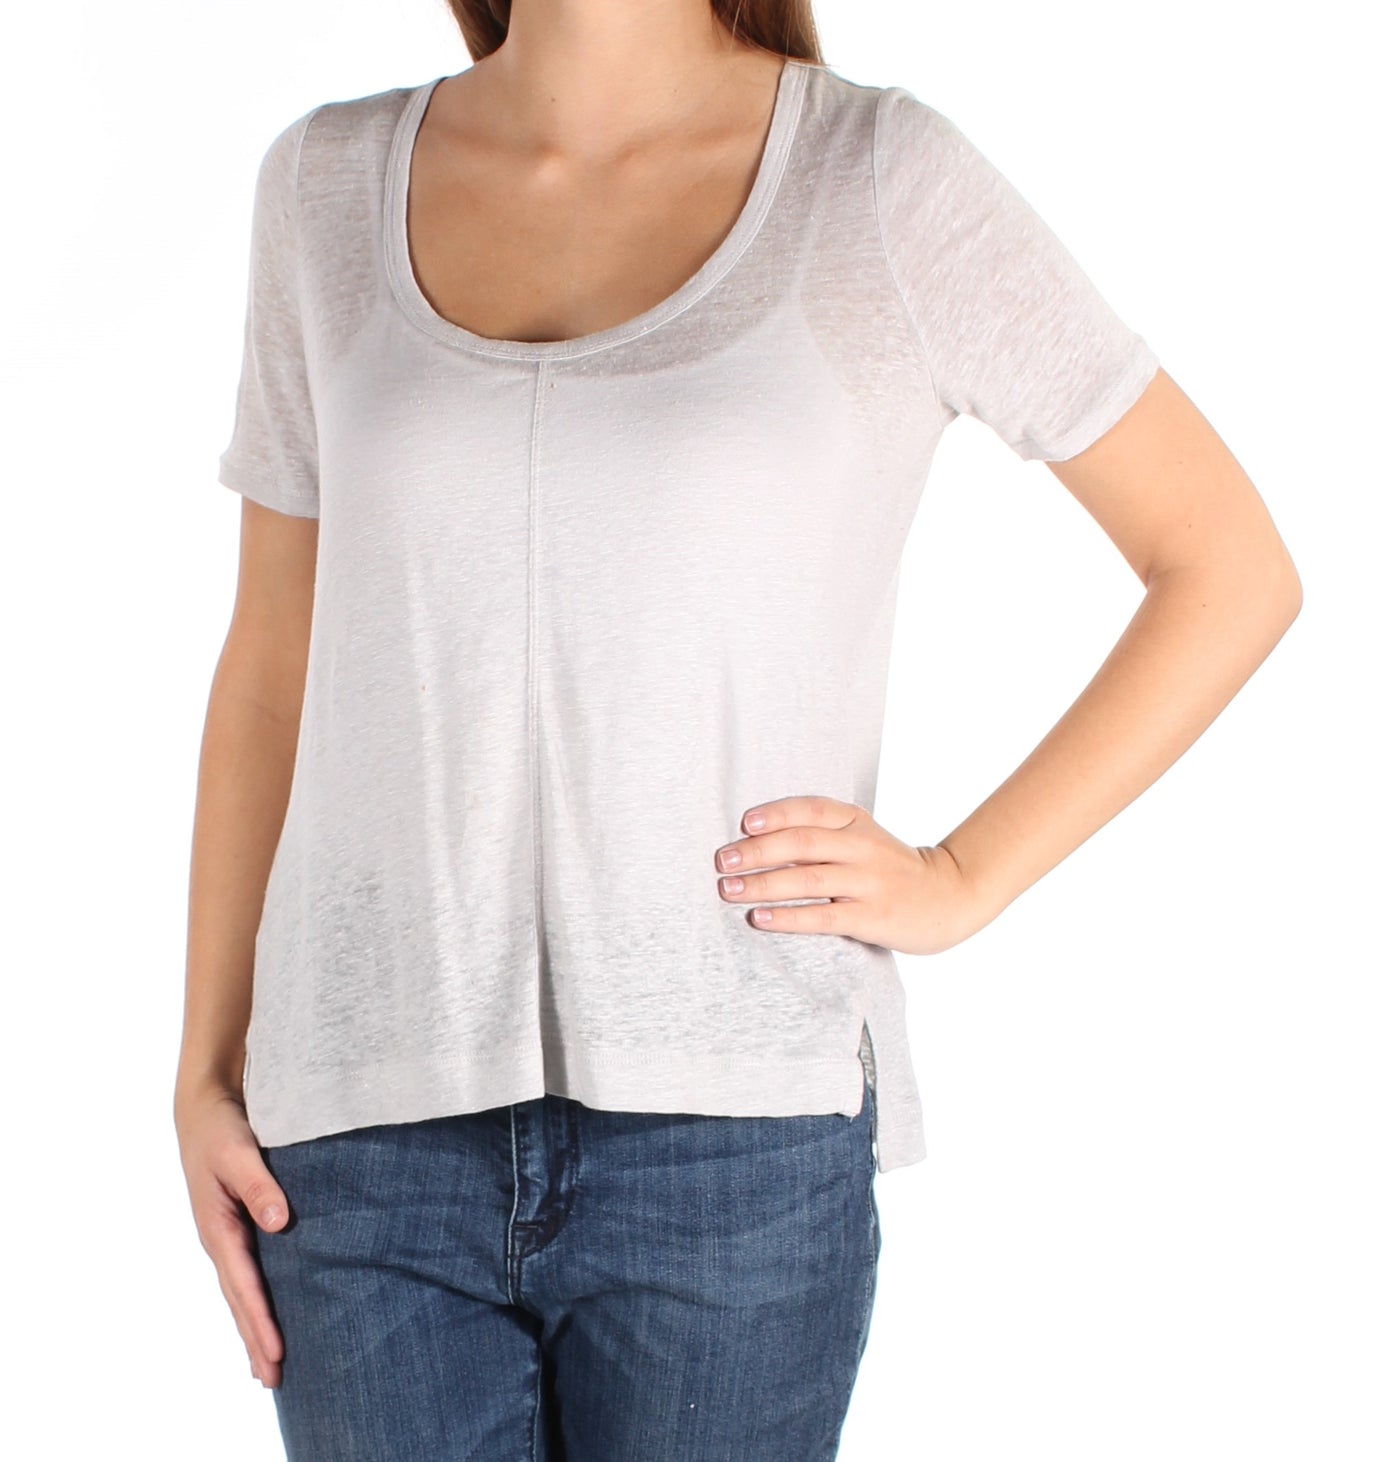 VINCE CAMUTO Womens Gray Sheer Short Sleeve Scoop Neck T-Shirt